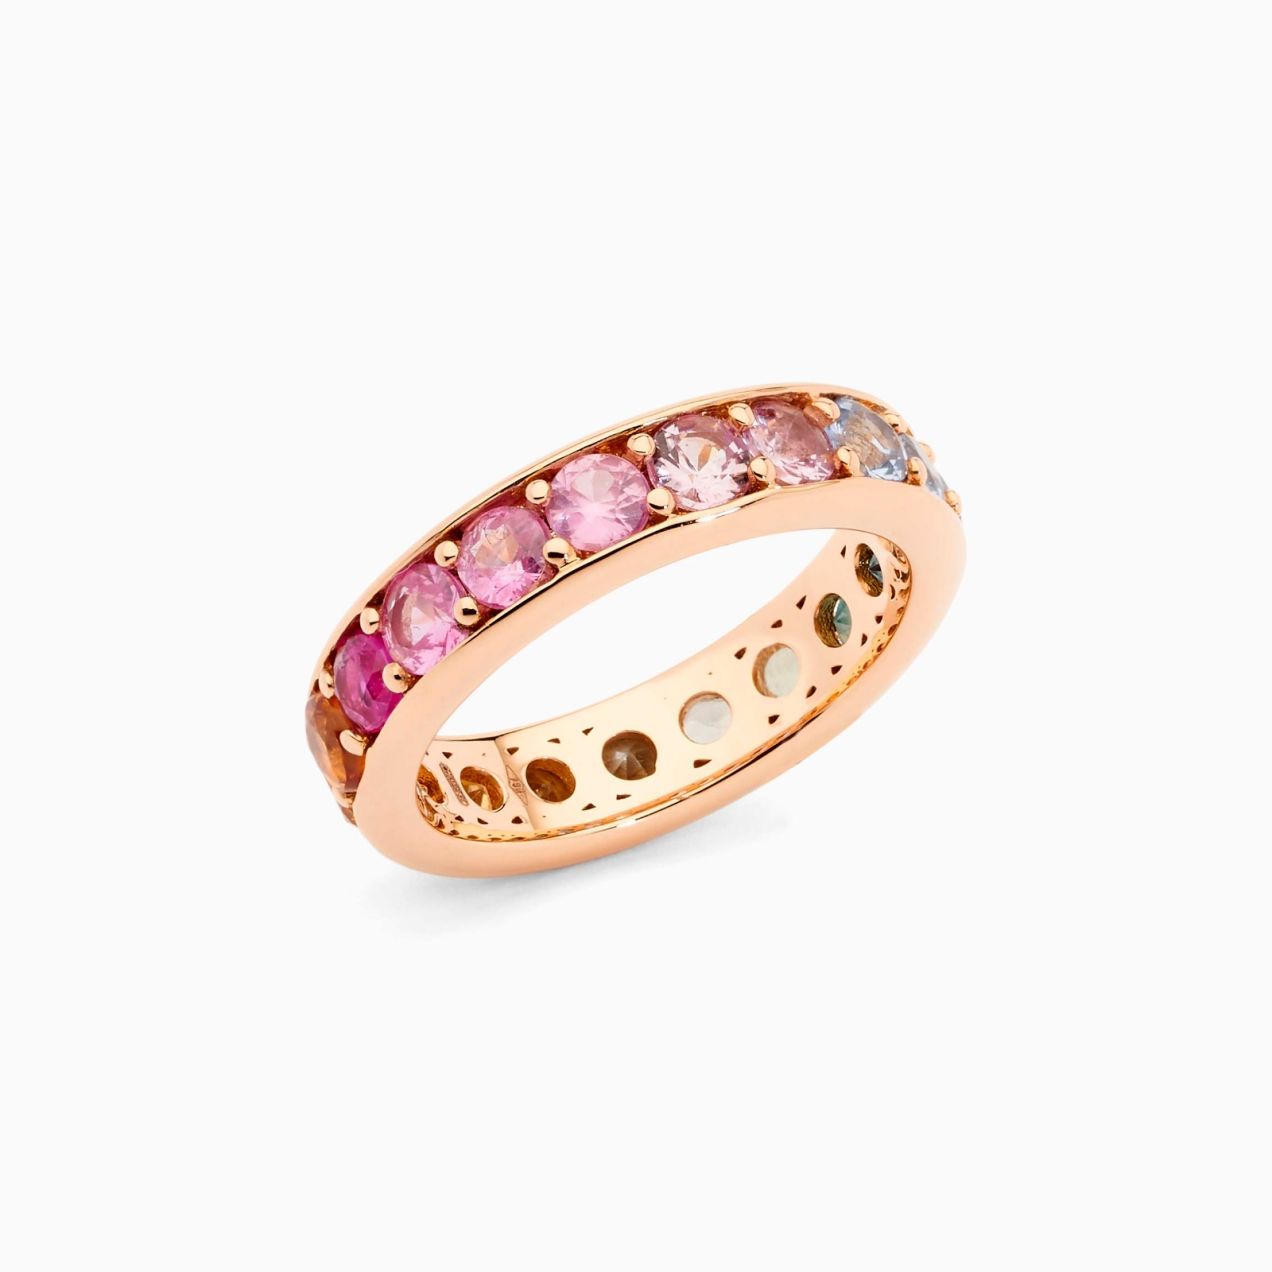 Rose gold rails wedding band ring with brilliant cut multicoloured sapphires